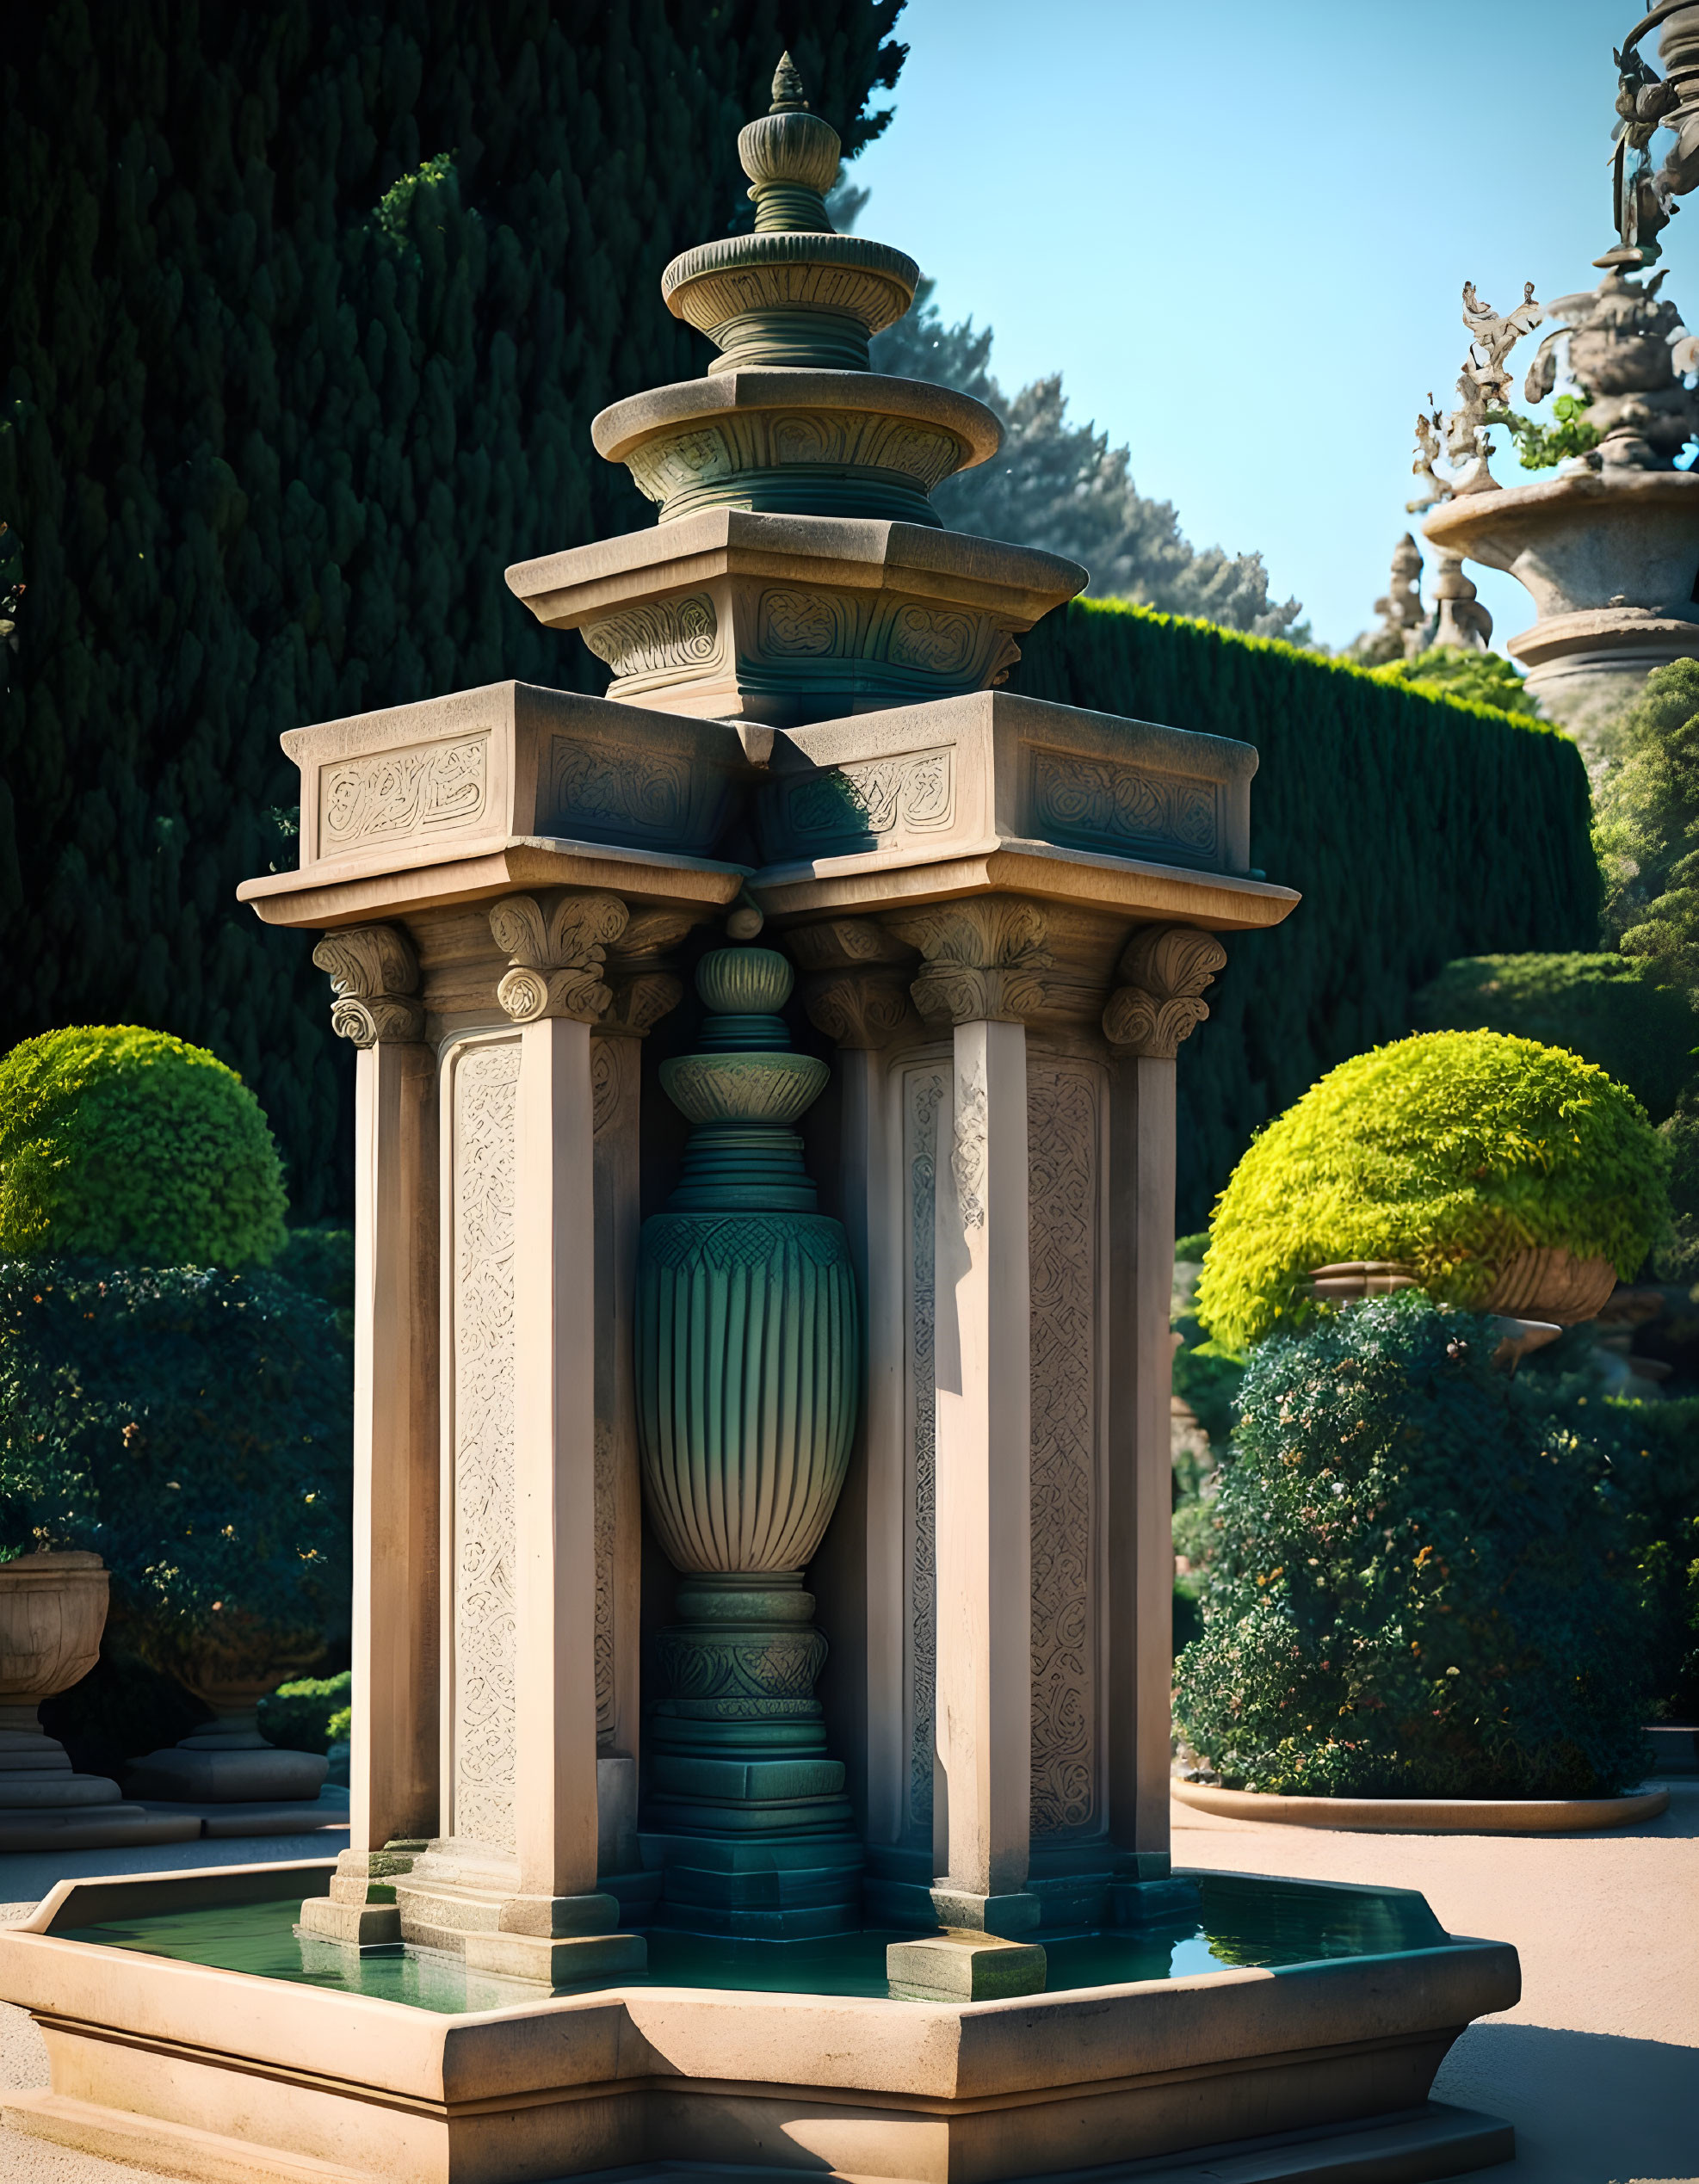 Tiered Stone Fountain Surrounded by Manicured Bushes in Serene Garden